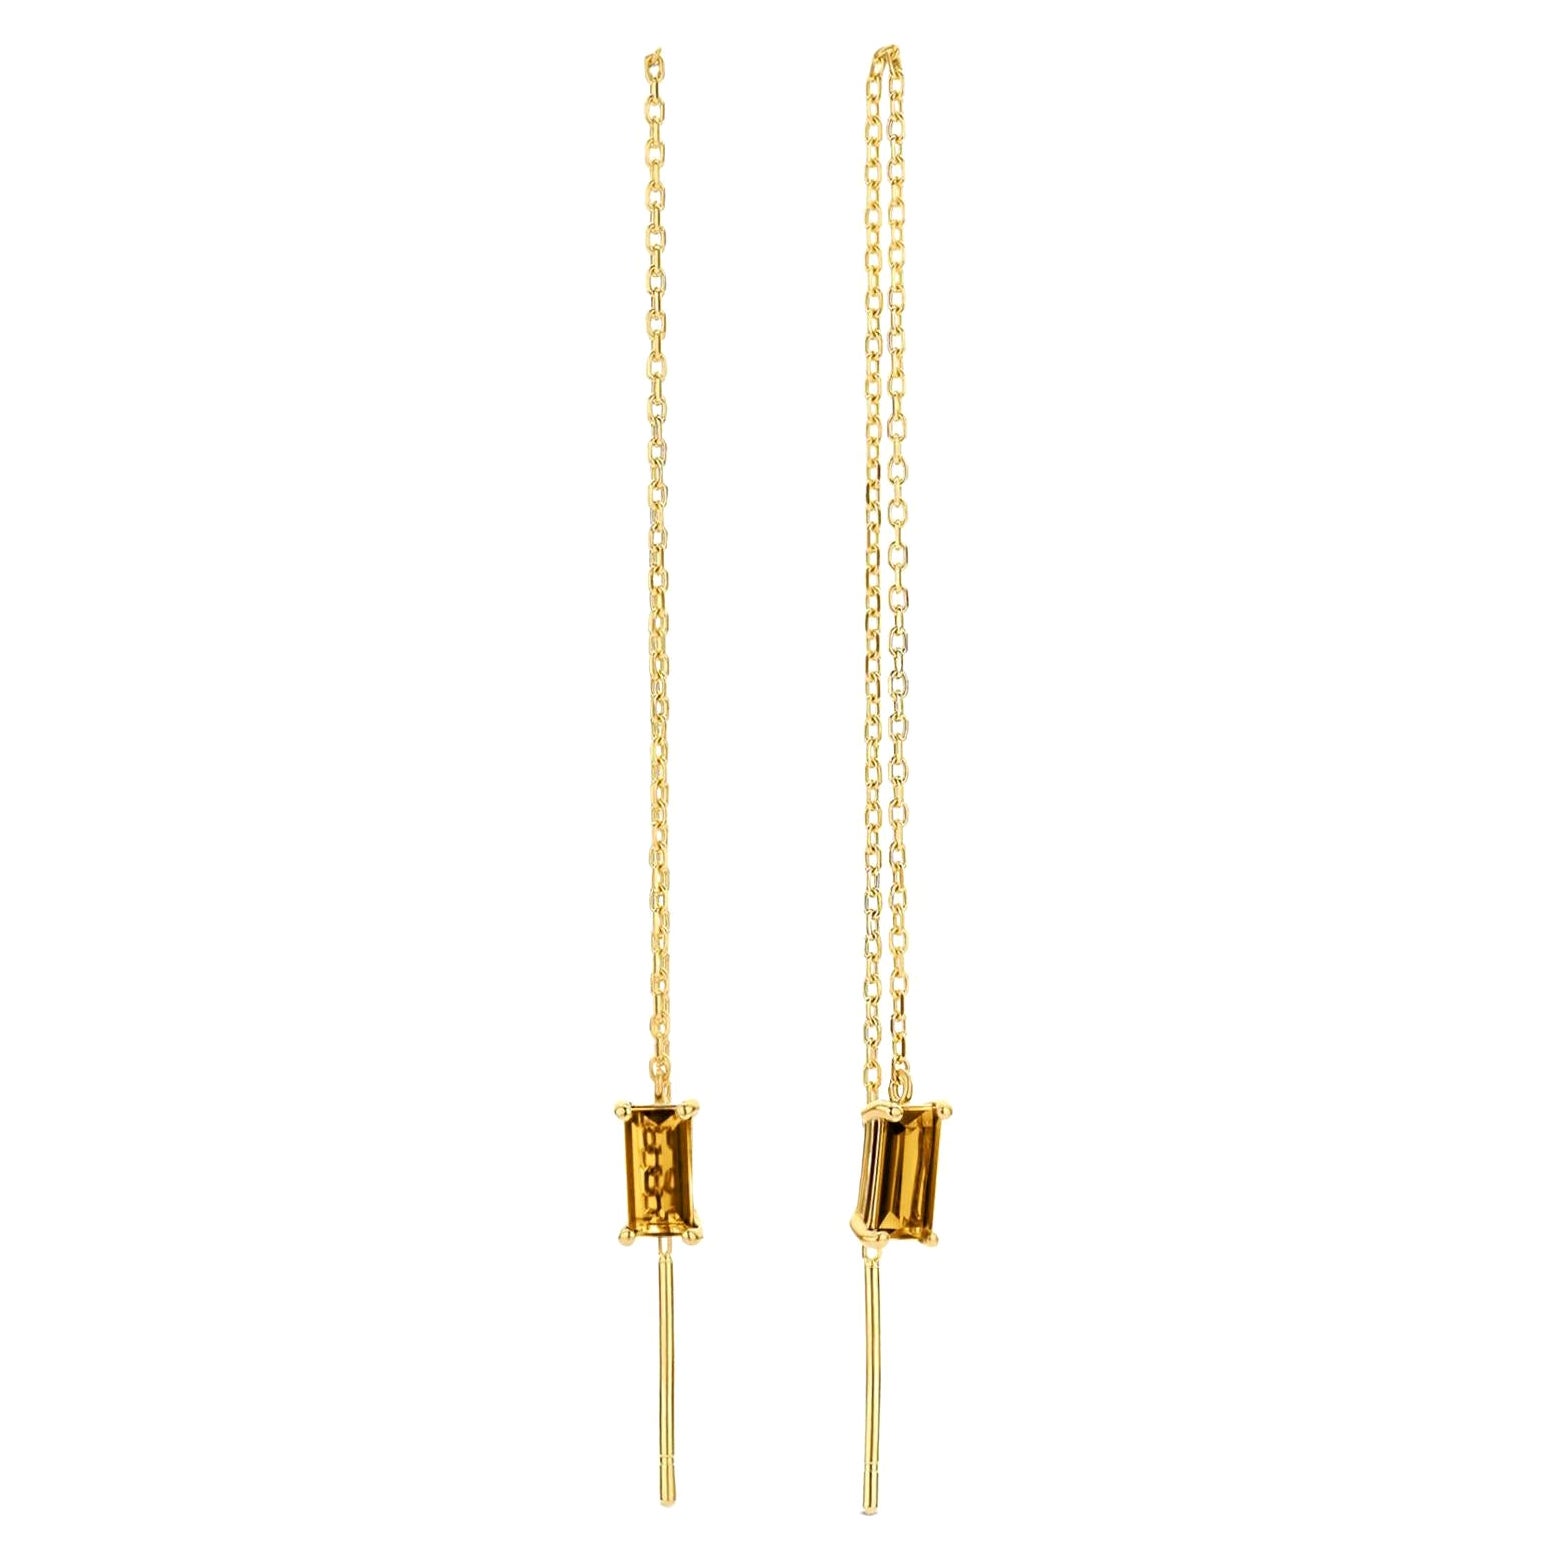 14k Solid Gold Drop Earrings with Citrine, Chain Gold Earrings